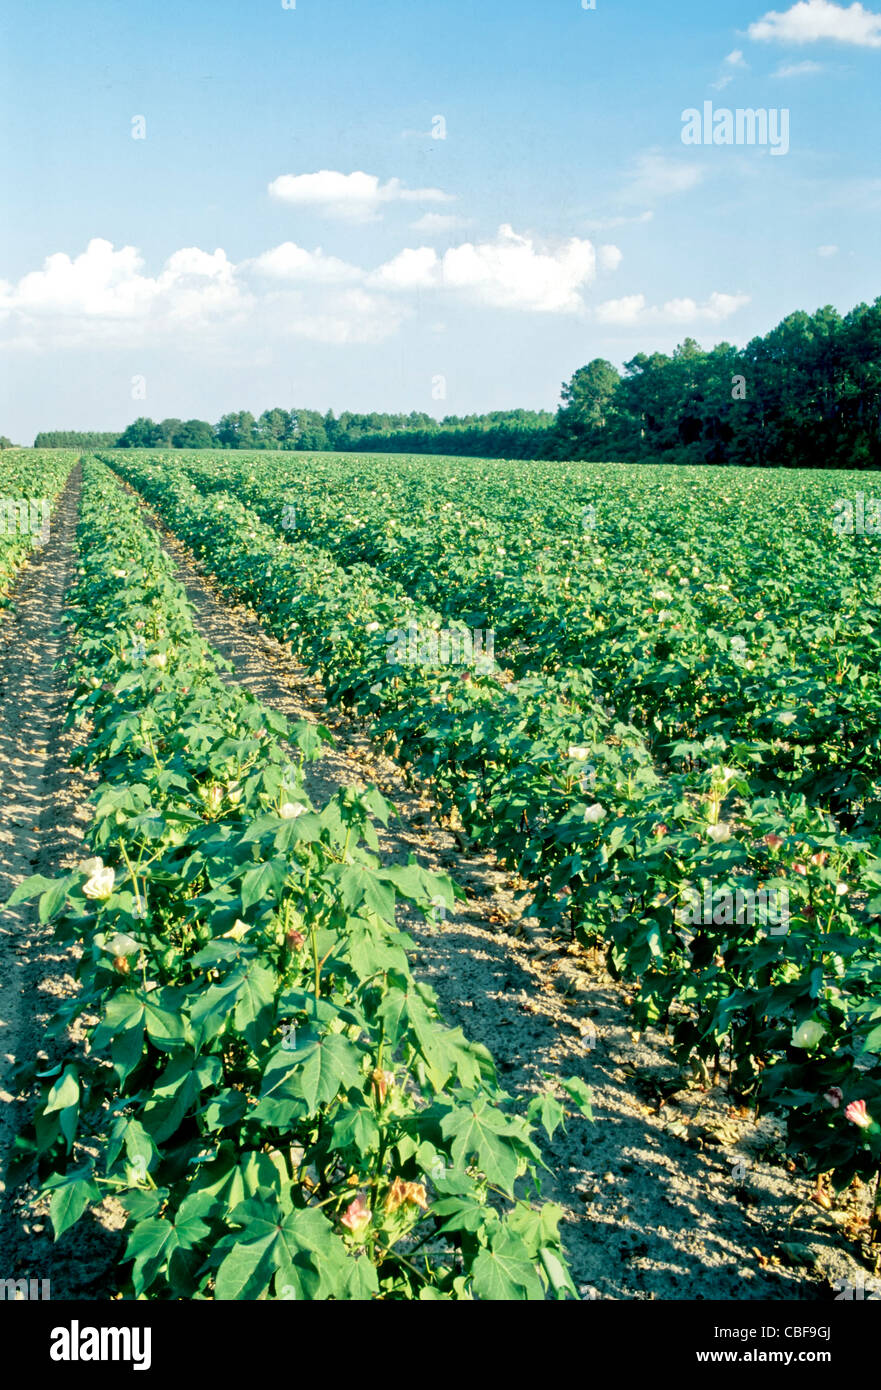 Cotton field in blossom, converging rows. Stock Photo